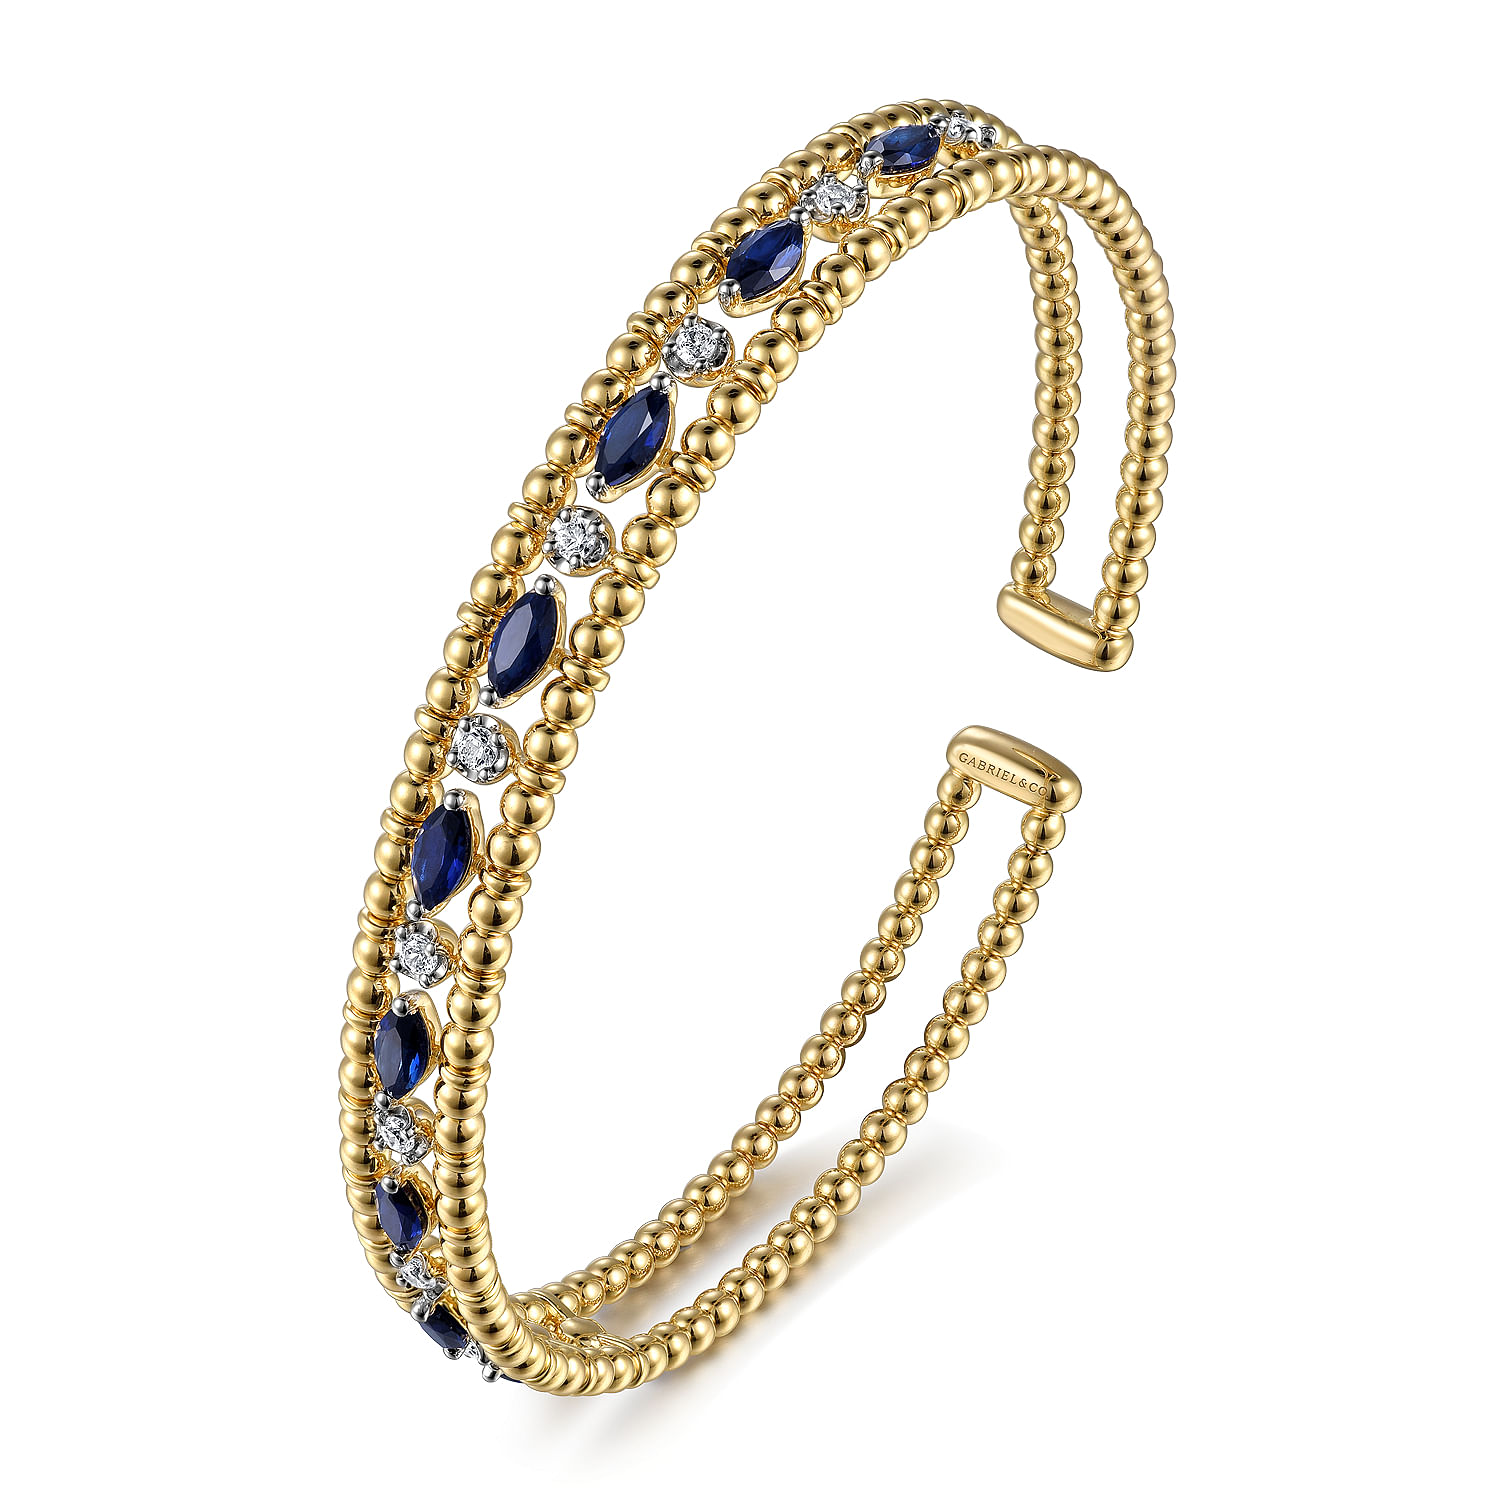 14K Yellow Gold Bujukan Cuff Bracelet with Marquise Sapphire and Round Diamonds